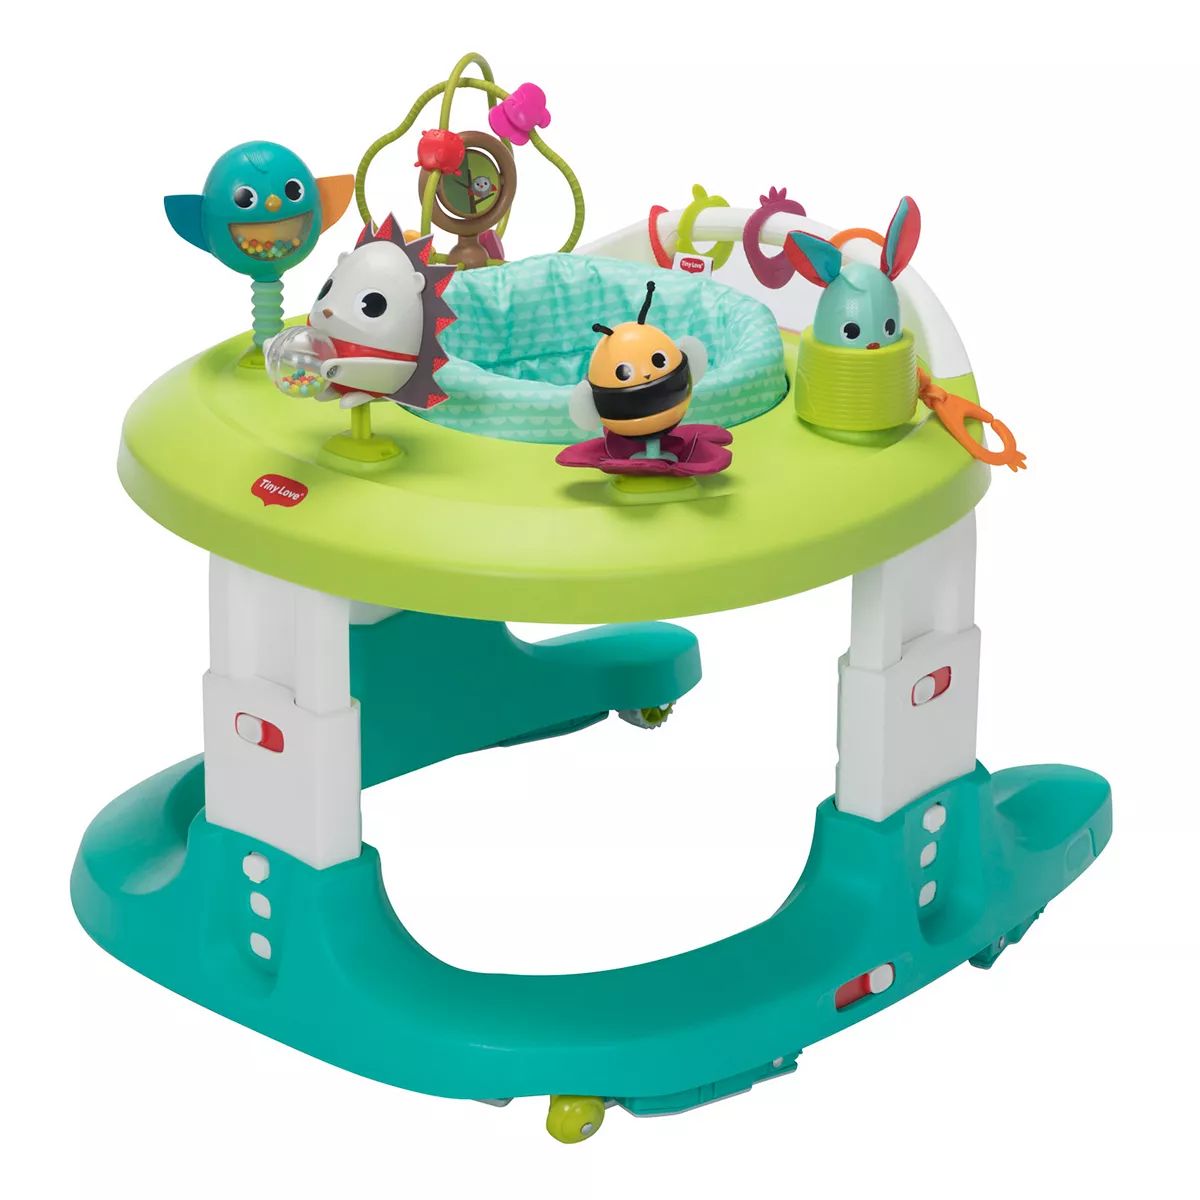 Tiny Love Meadow Tales Here I Grow 4-in-1 Activity Center | Kohl's